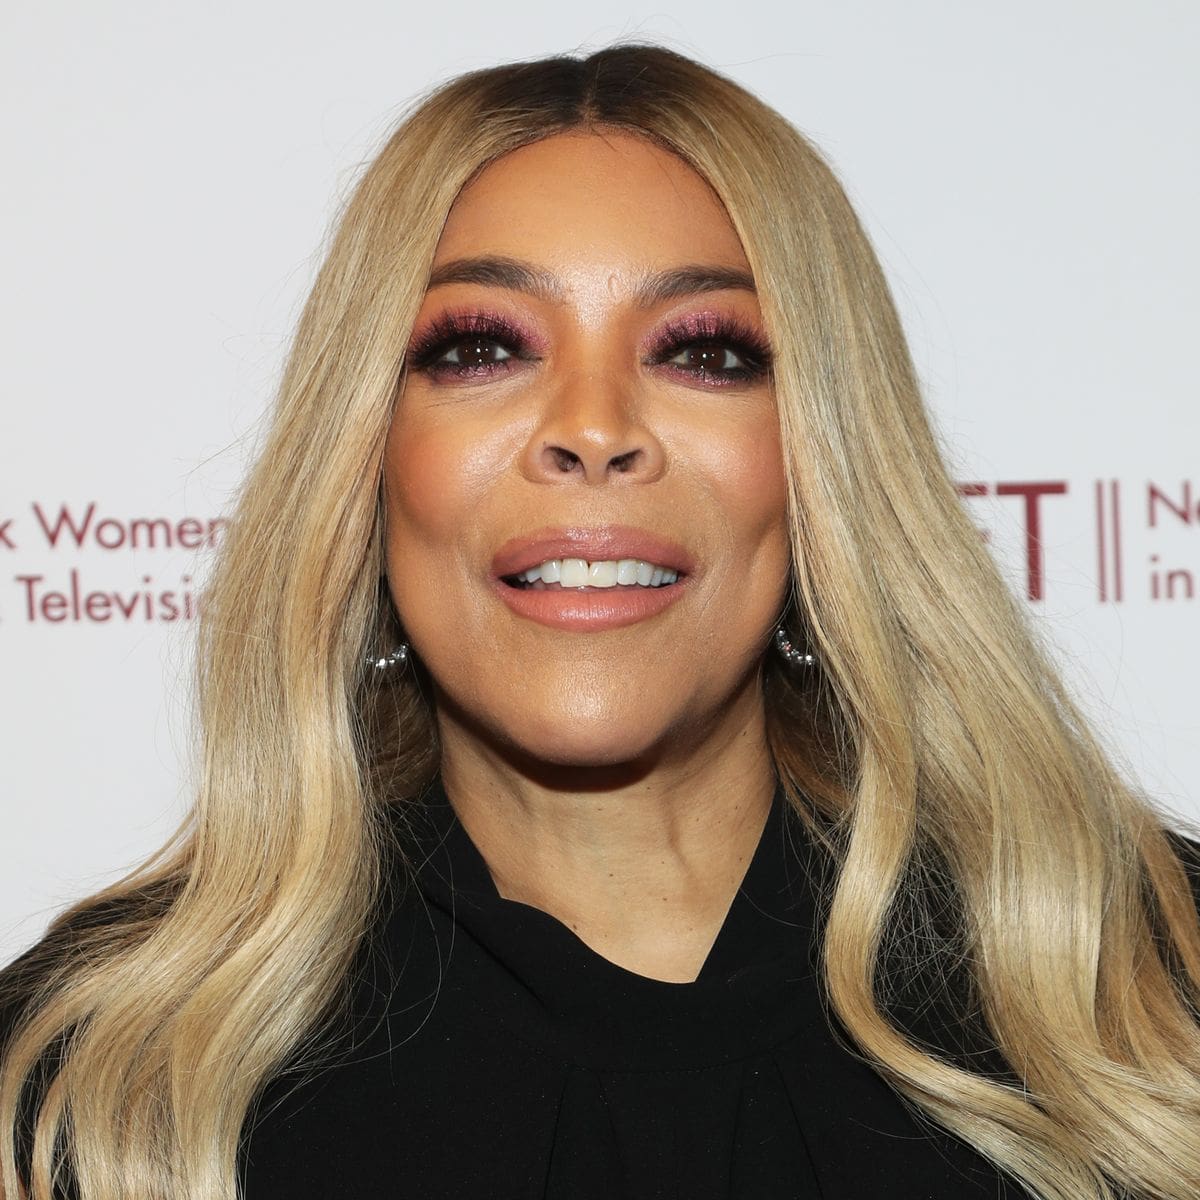 wendy-williams-is-trending-for-all-the-wrong-reasons-see-why-fans-are-shocked